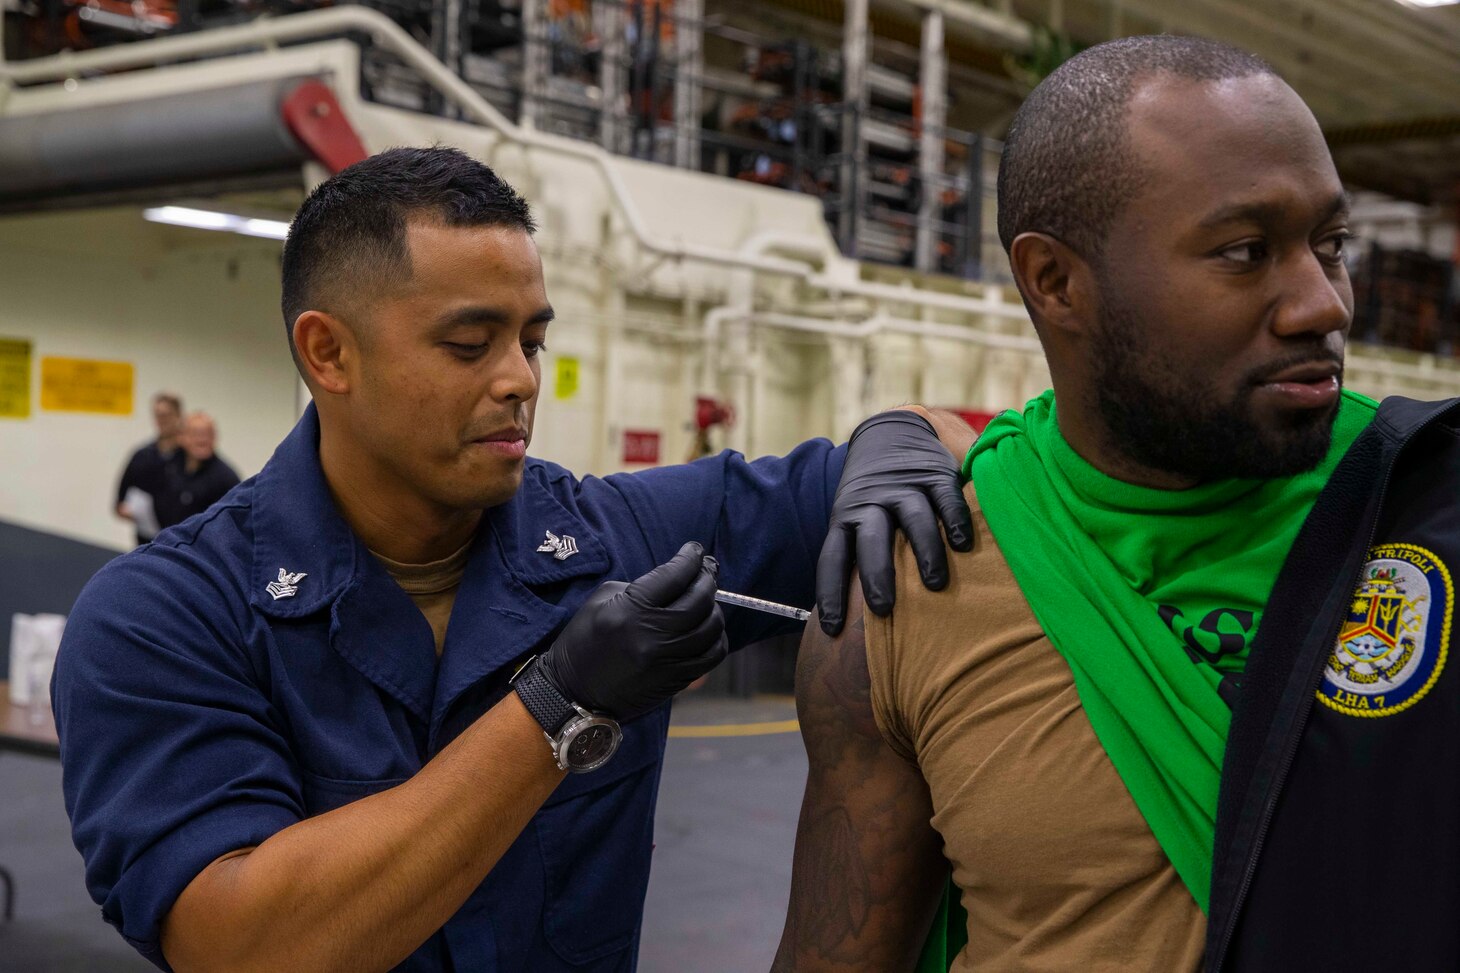 Hospital Corpsman 1st Class Christopher McCloskey, from Oceanside, California, left, gives a typhoid vaccine to a Sailor in the hangar bay aboard amphibious assault carrier USS Tripoli (LHA 7), May 17, 2022. Tripoli is underway conducting routine operations in U.S. 7th Fleet. (U.S. Navy photo by Mass Communication Specialist 3rd Class Maci Sternod)